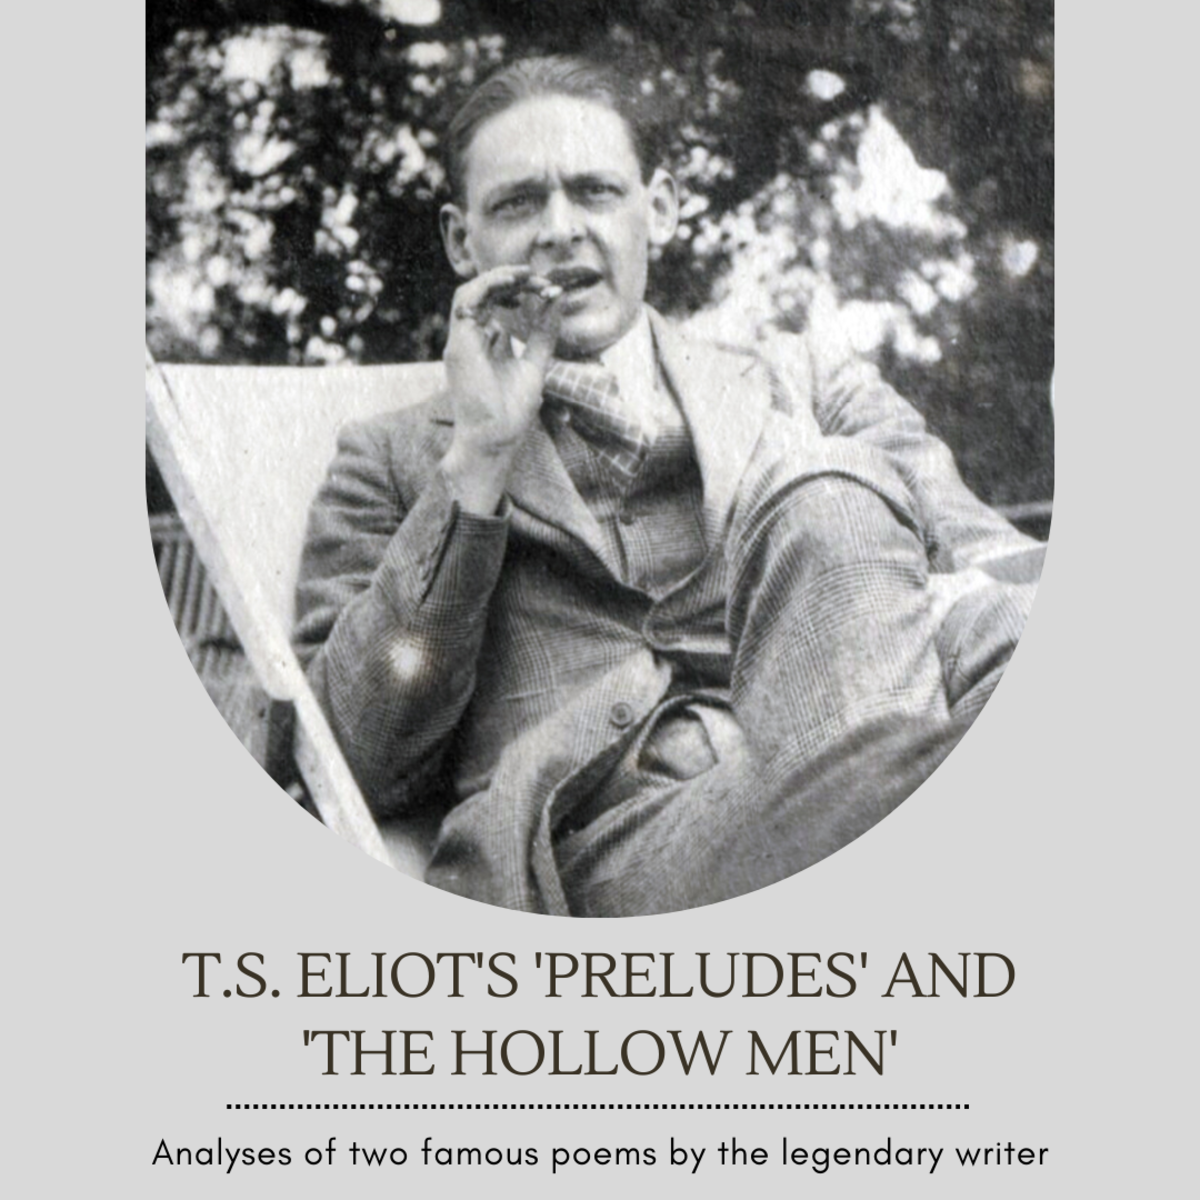 This article will take a look at T.S. Eliot's poems, 'The Hollow Men' and 'Preludes.'